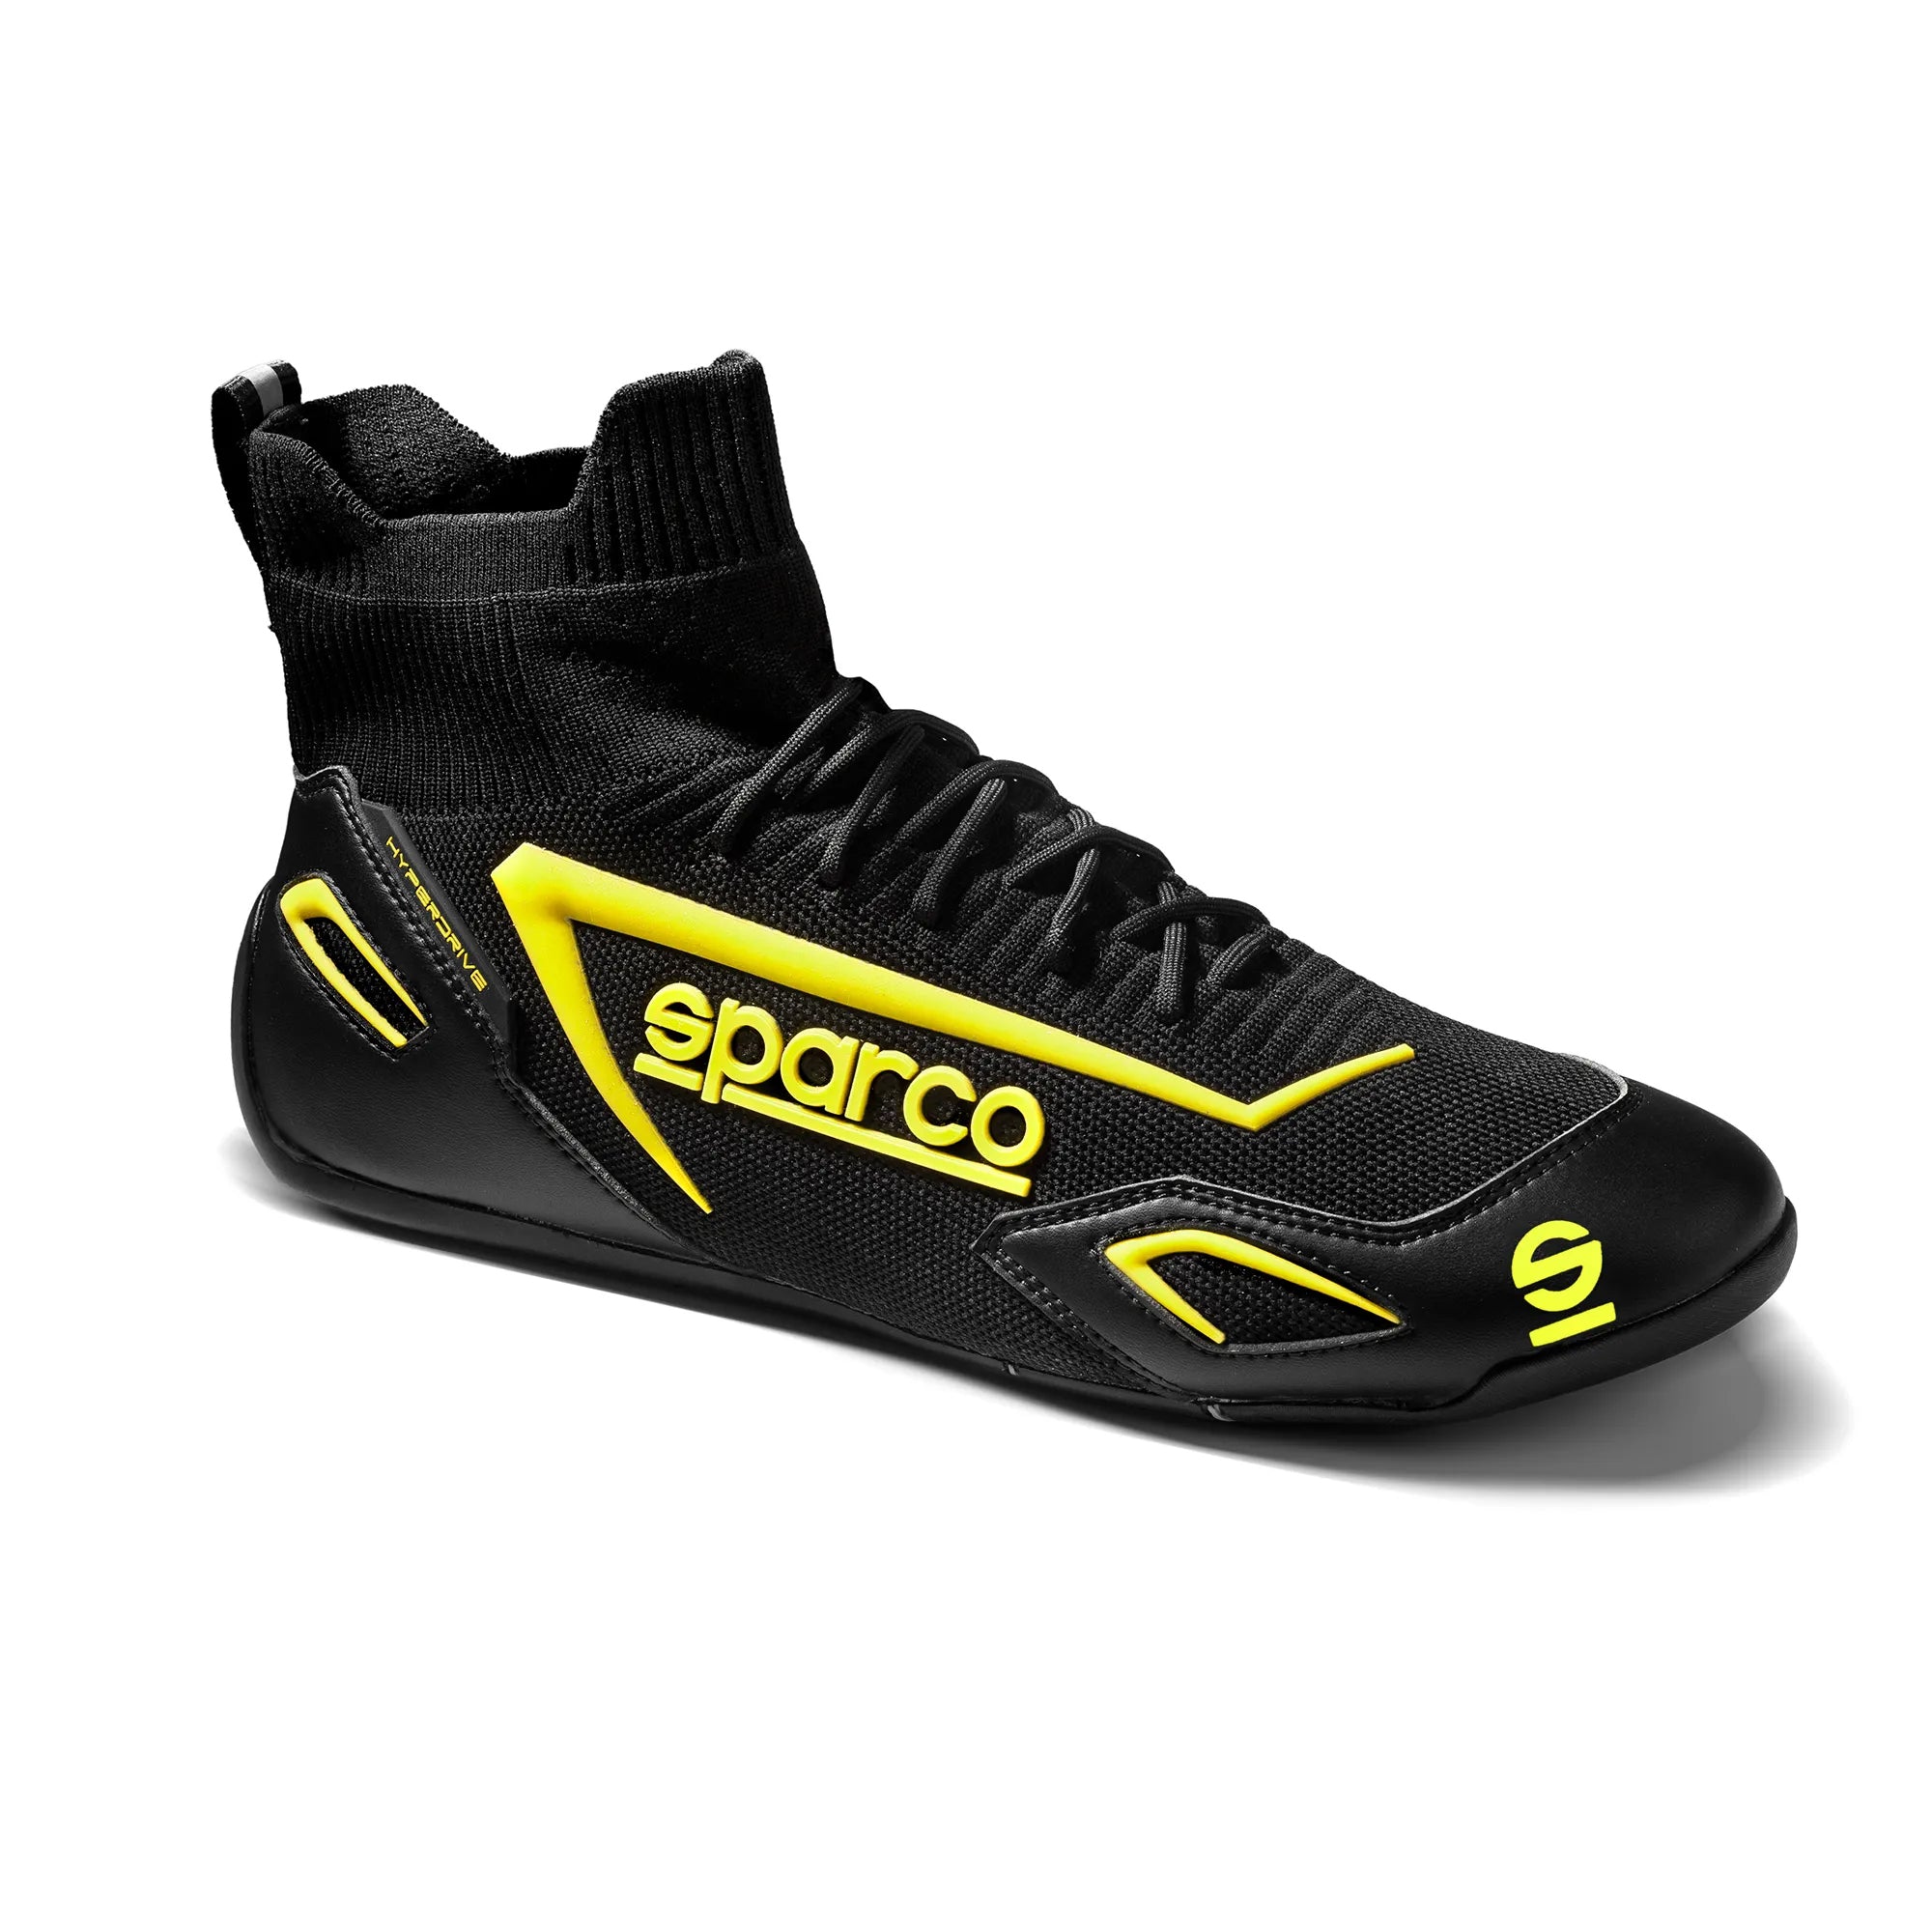 SPARCO 00129343NRGF Gaming sim racing shoes HYPERDRIVE, black/yellow, size 43 Photo-1 